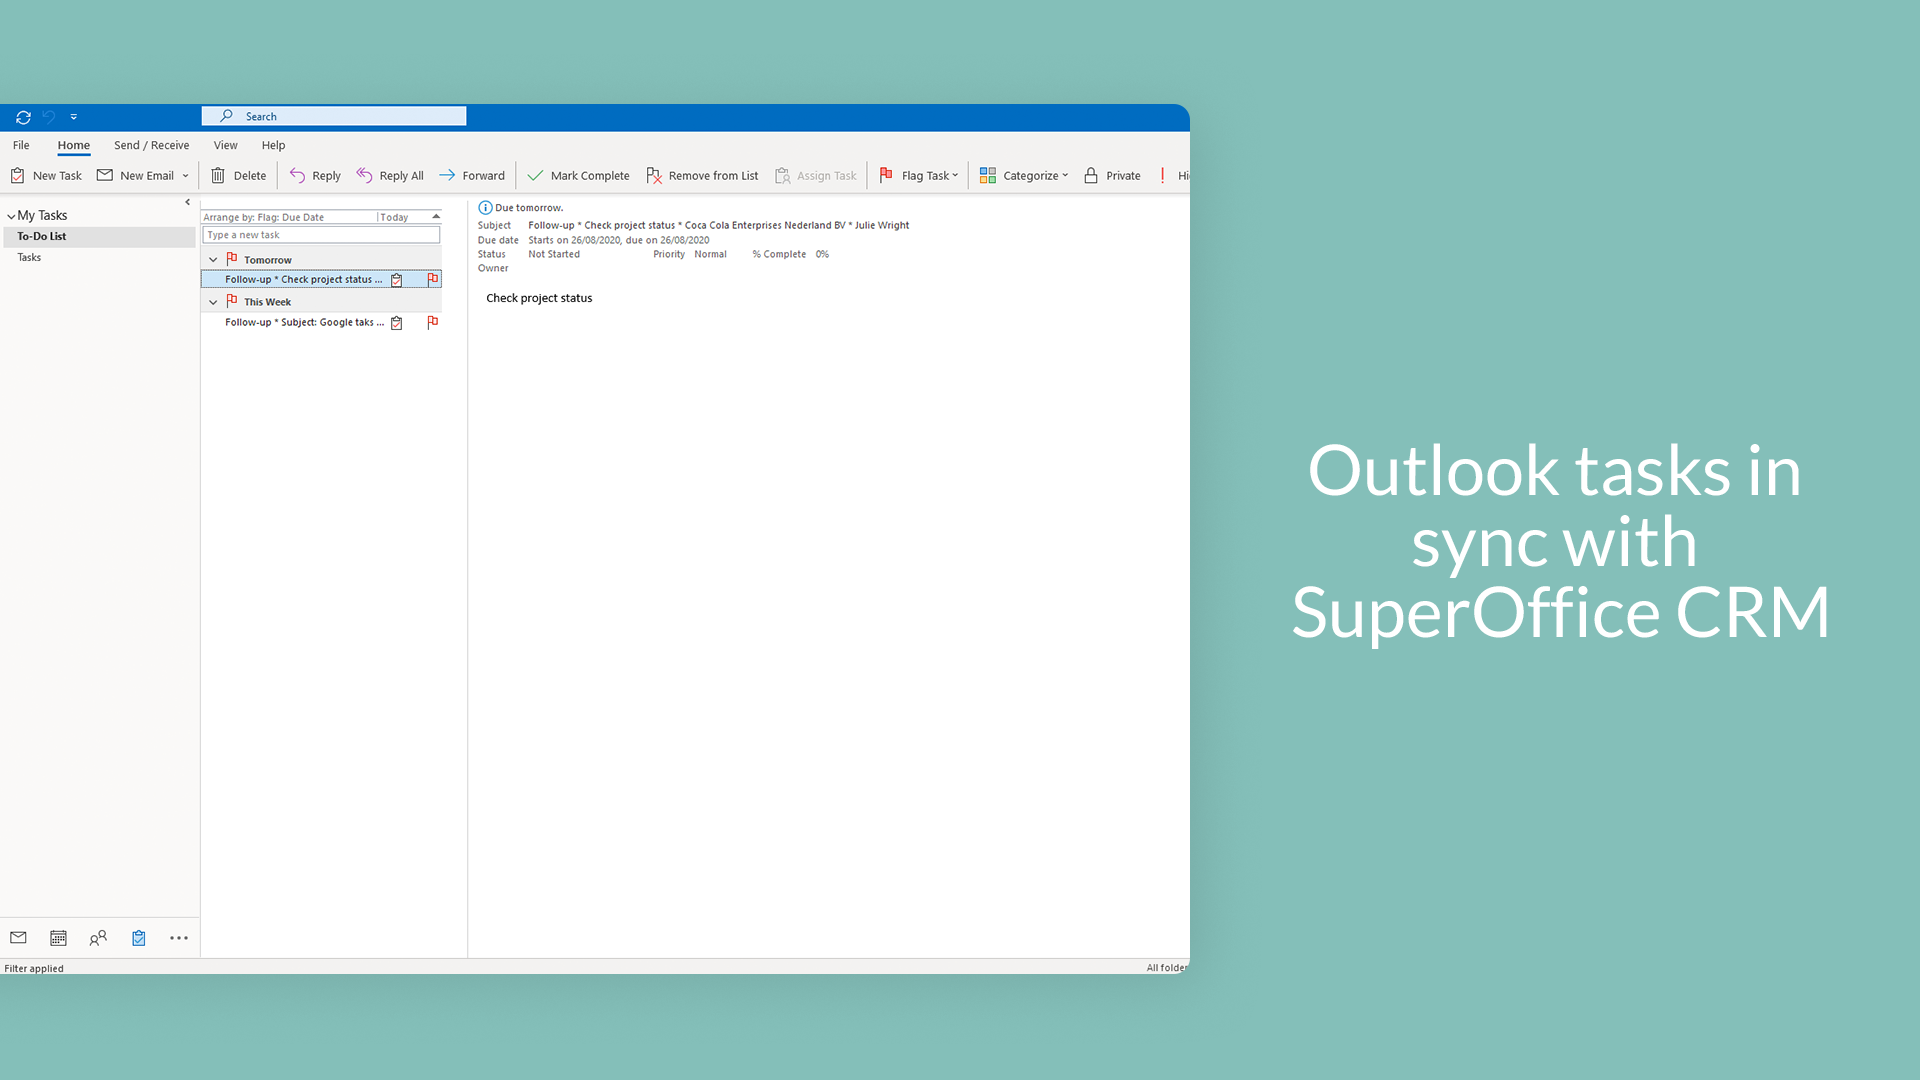 Outlook tasks in sync with SuperOffice CRM